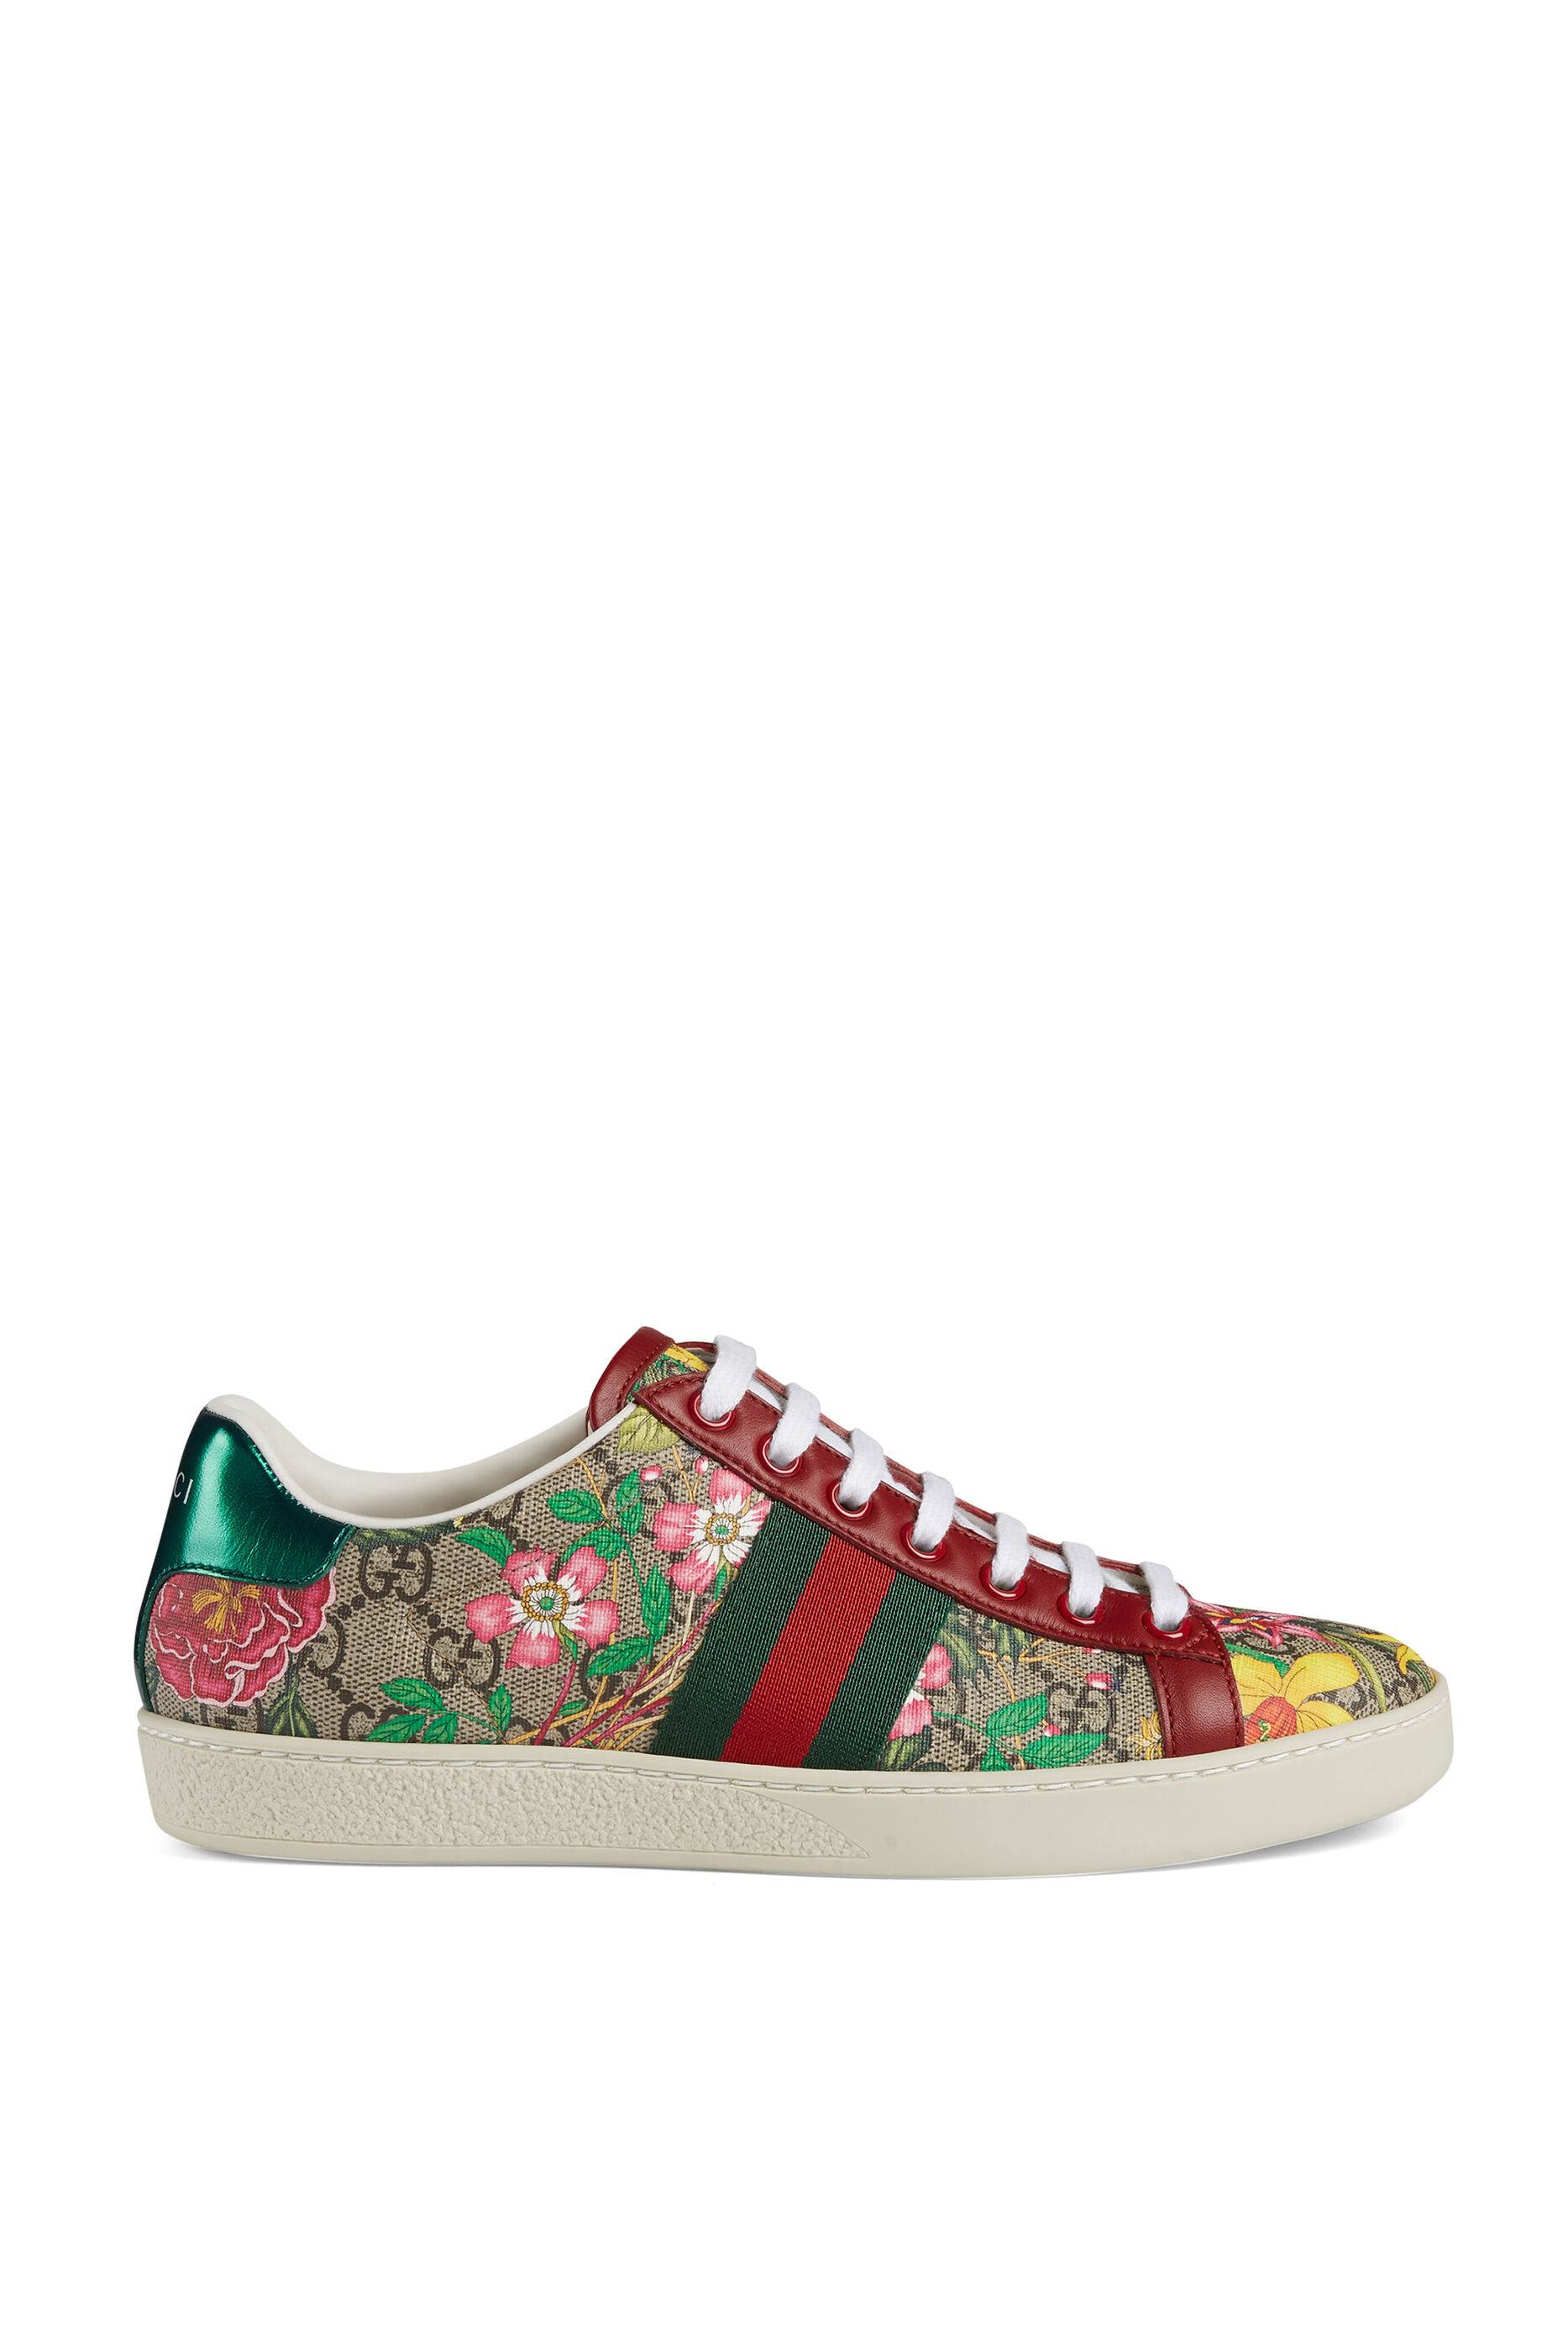 gucci floral sneakers